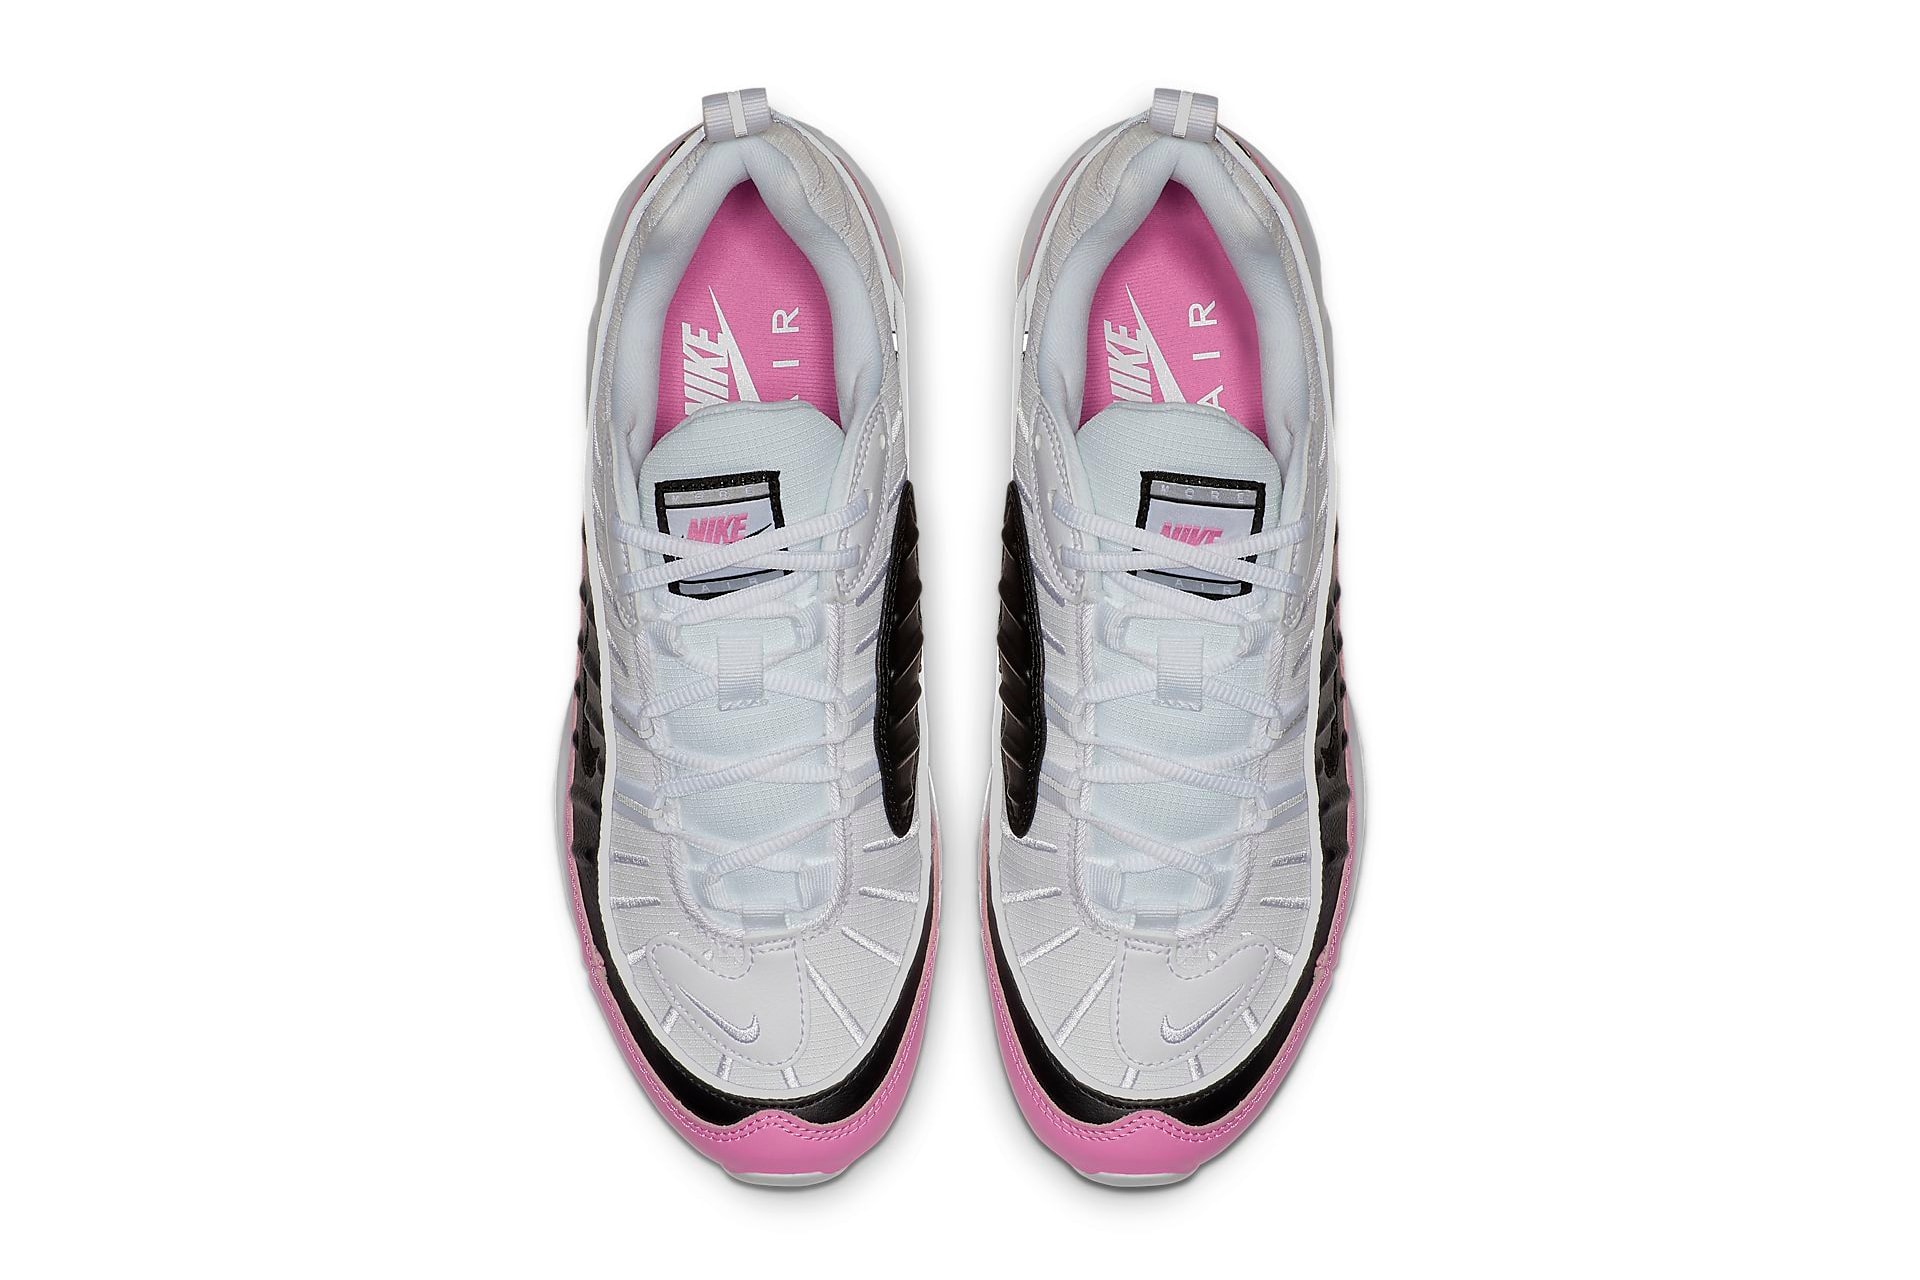 Nike Air Max 98 SE China Rose Pink Black White Sneakers Trainers